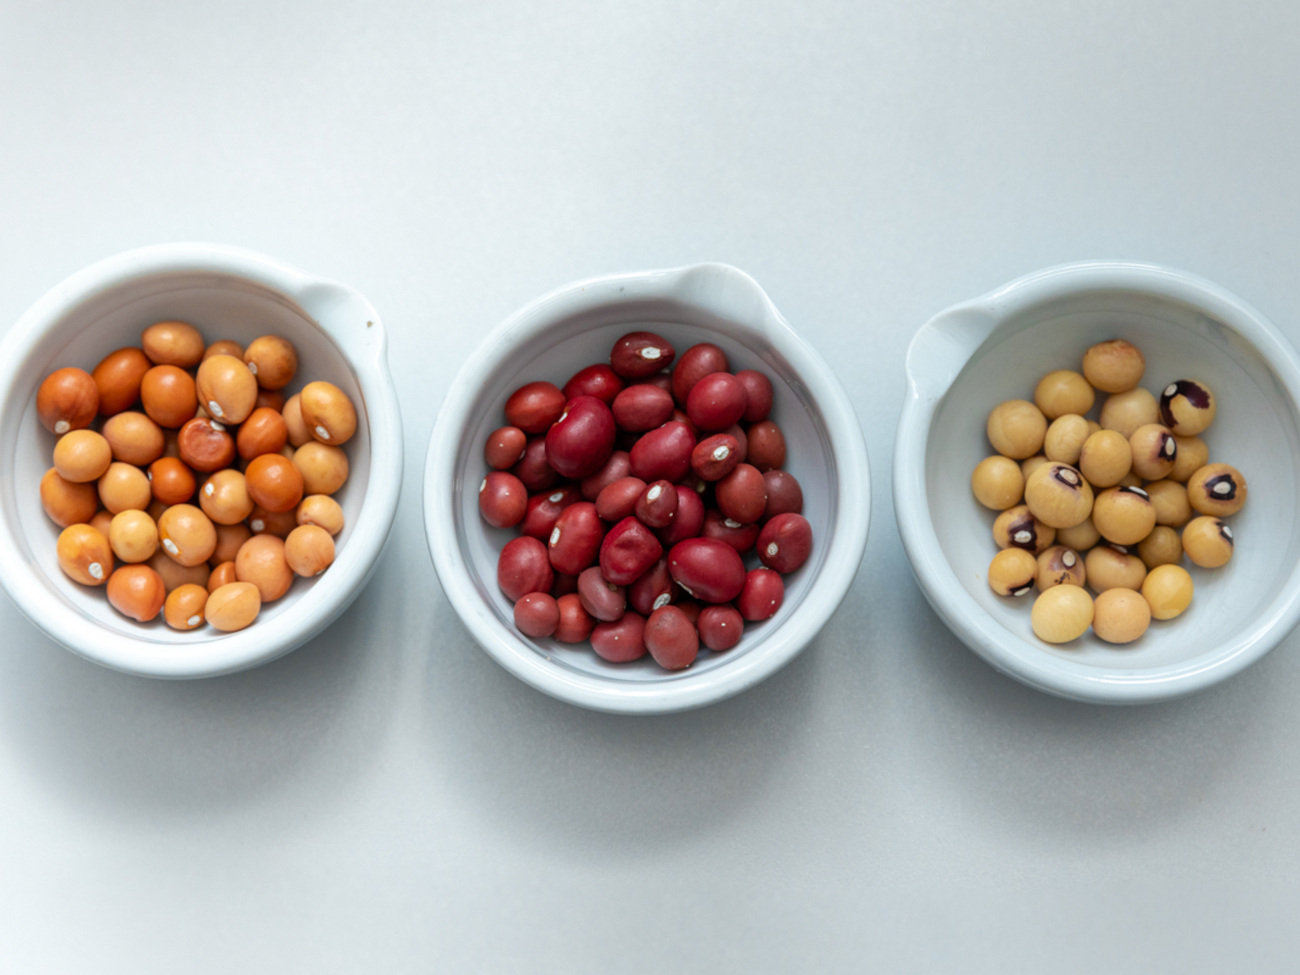 Three different varieties of the earth pea in bowls